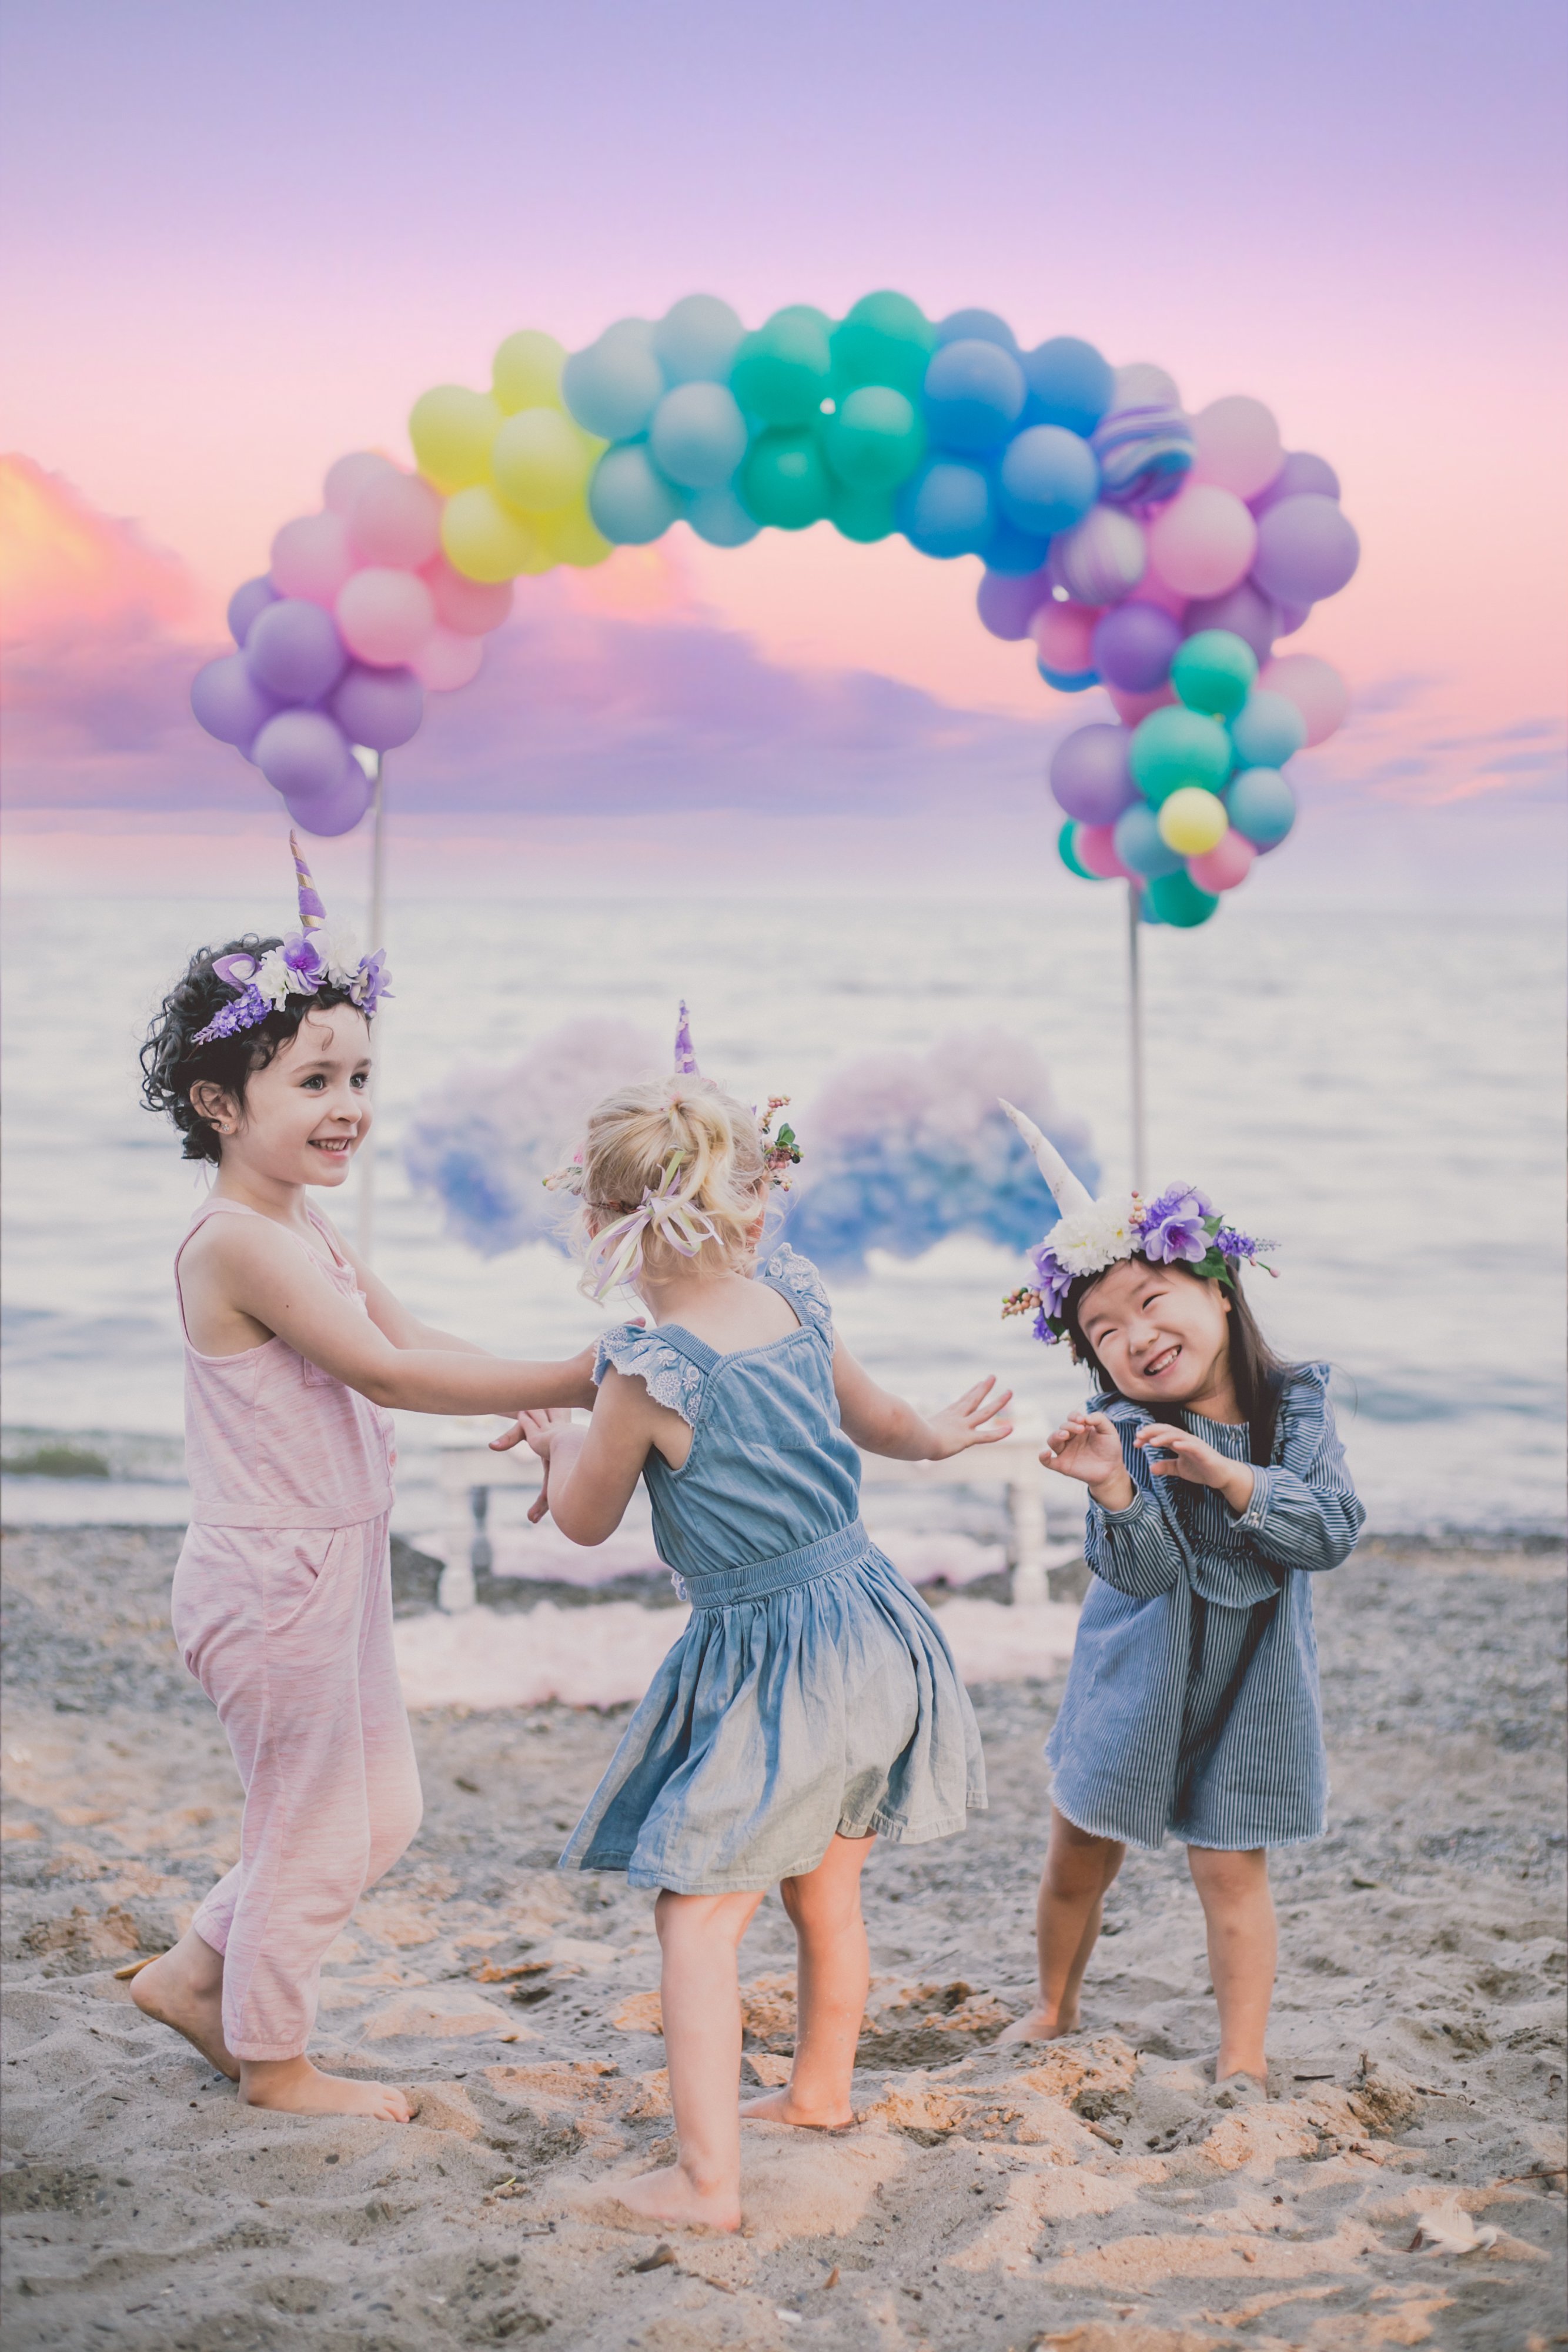 unicorn and rainbows themed kids birthday party event